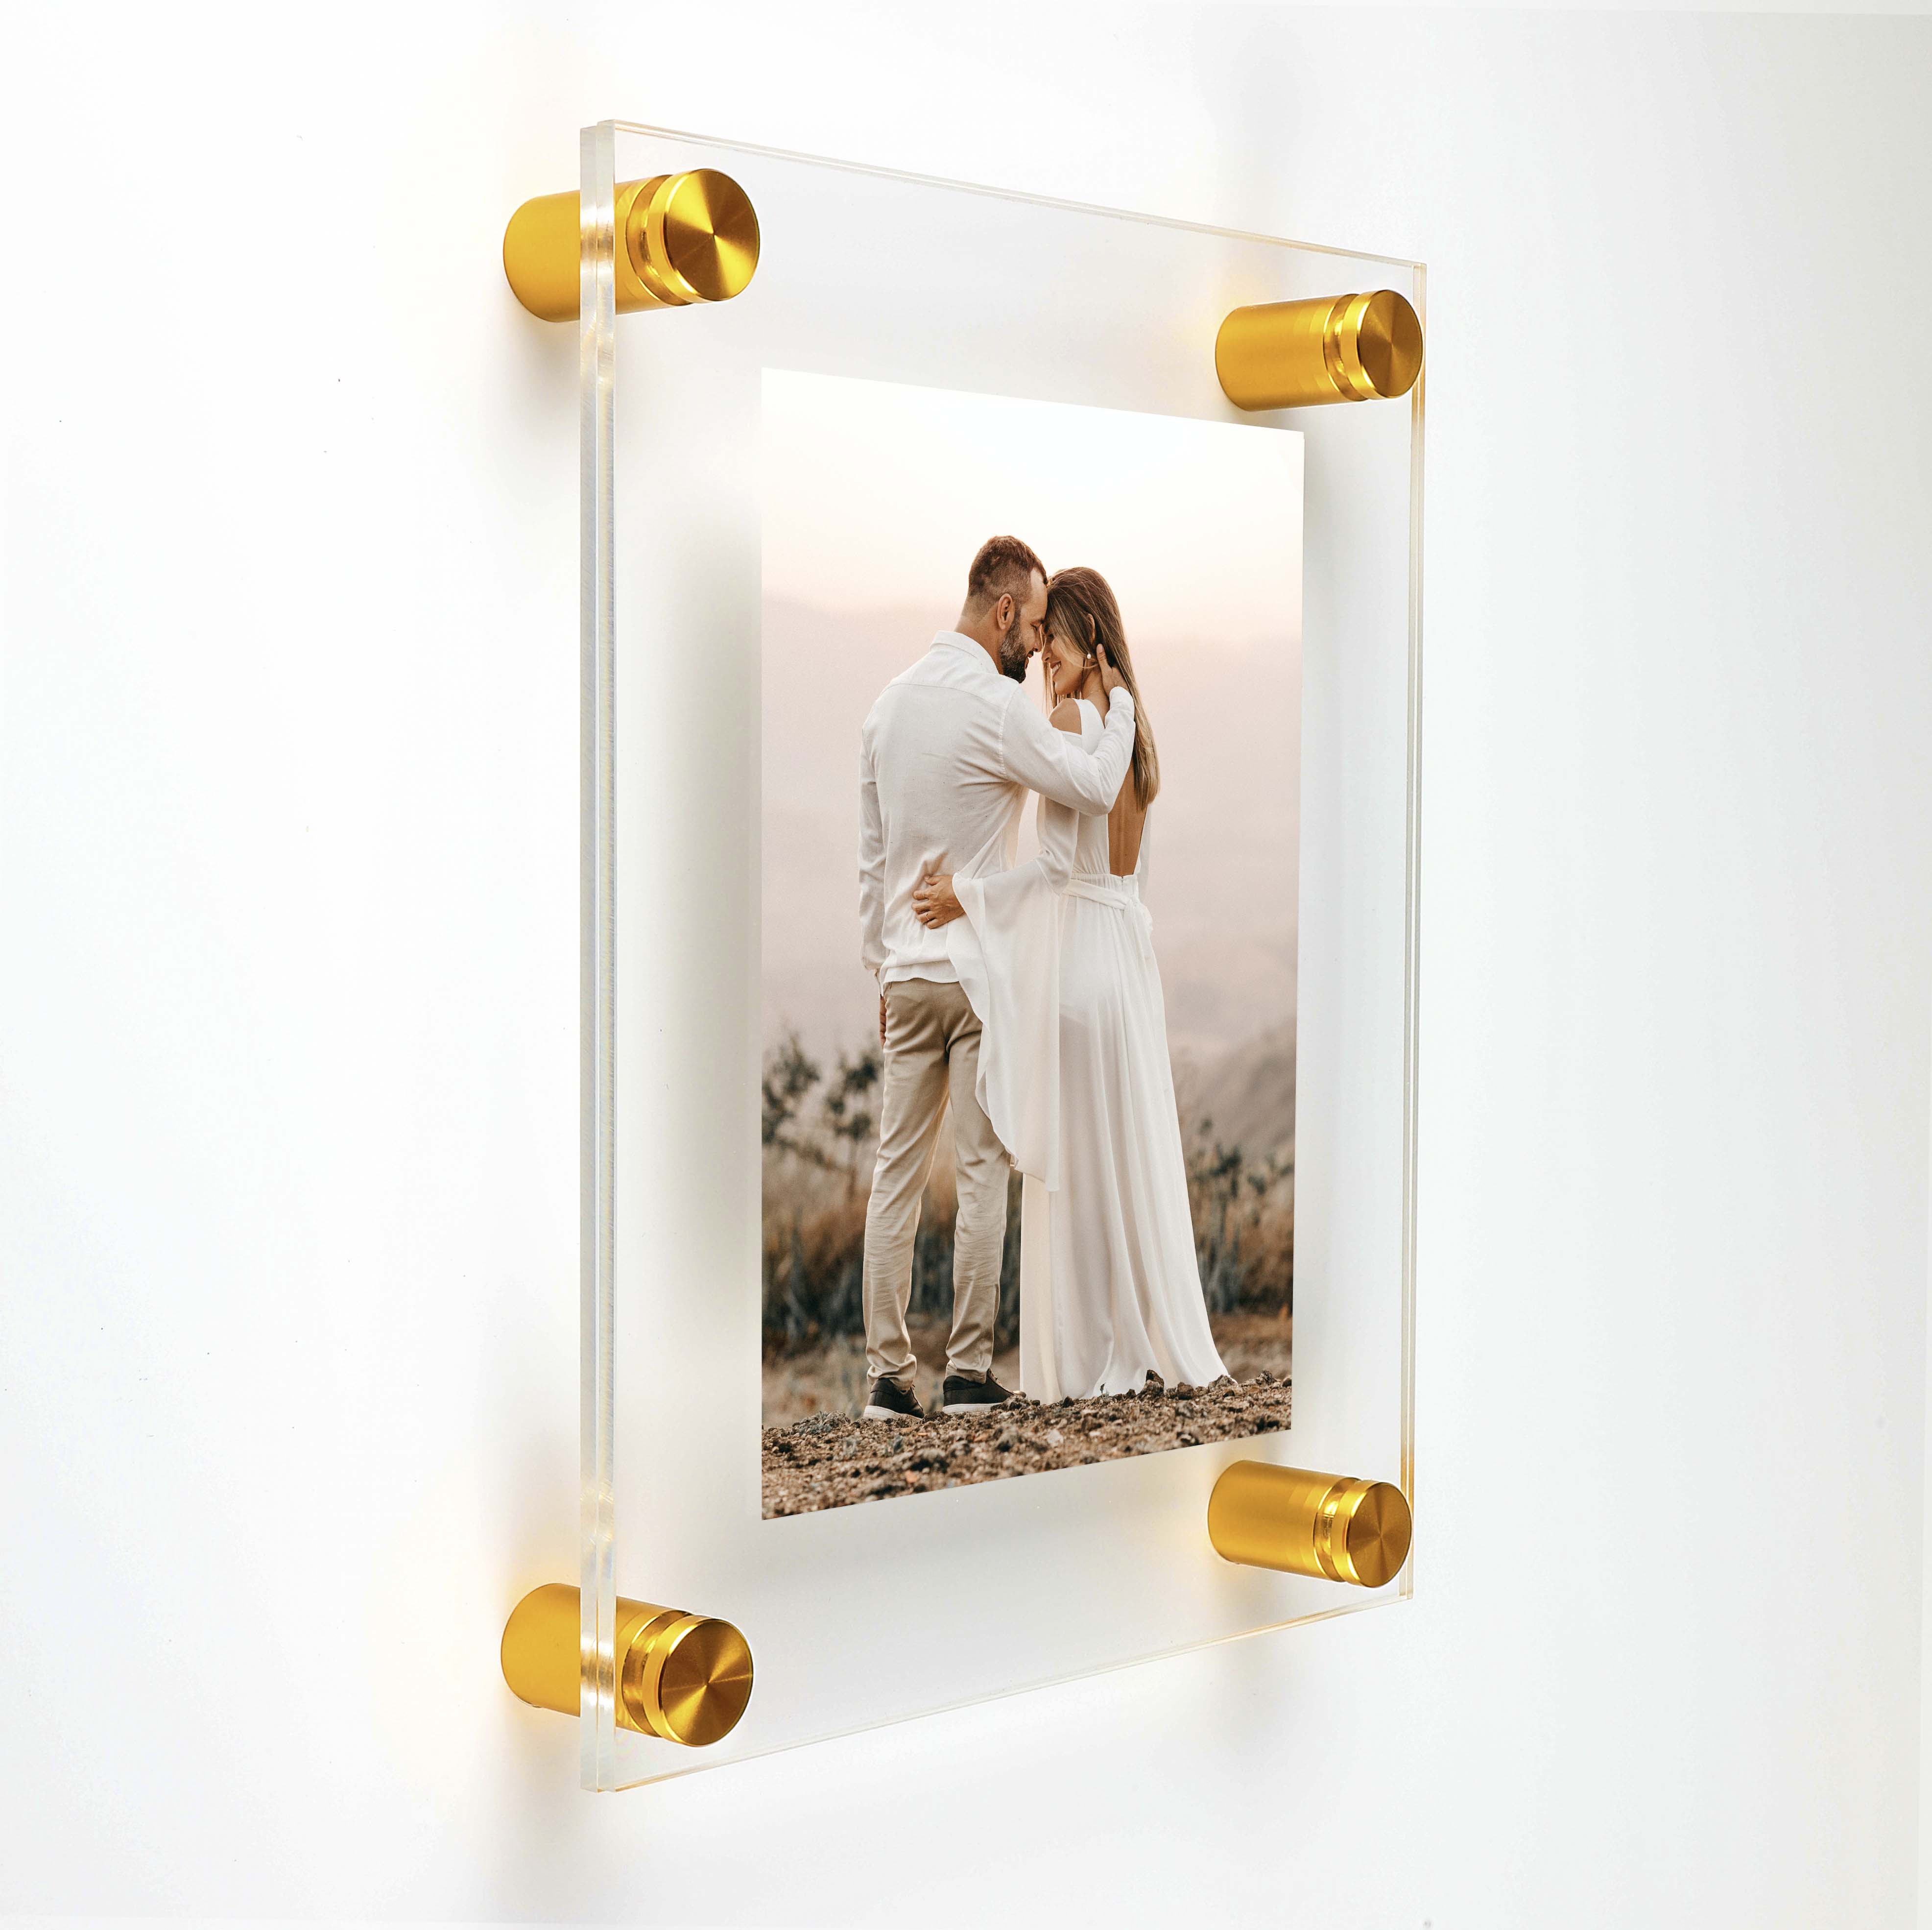 (2) 23-3/4'' x 29-3/4'' Clear Acrylics , Pre-Drilled With Polished Edges (Thick 3/16'' each), Wall Frame with (4) 5/8'' x 3/4'' Gold Anodized Aluminum Standoffs includes Screws and Anchors